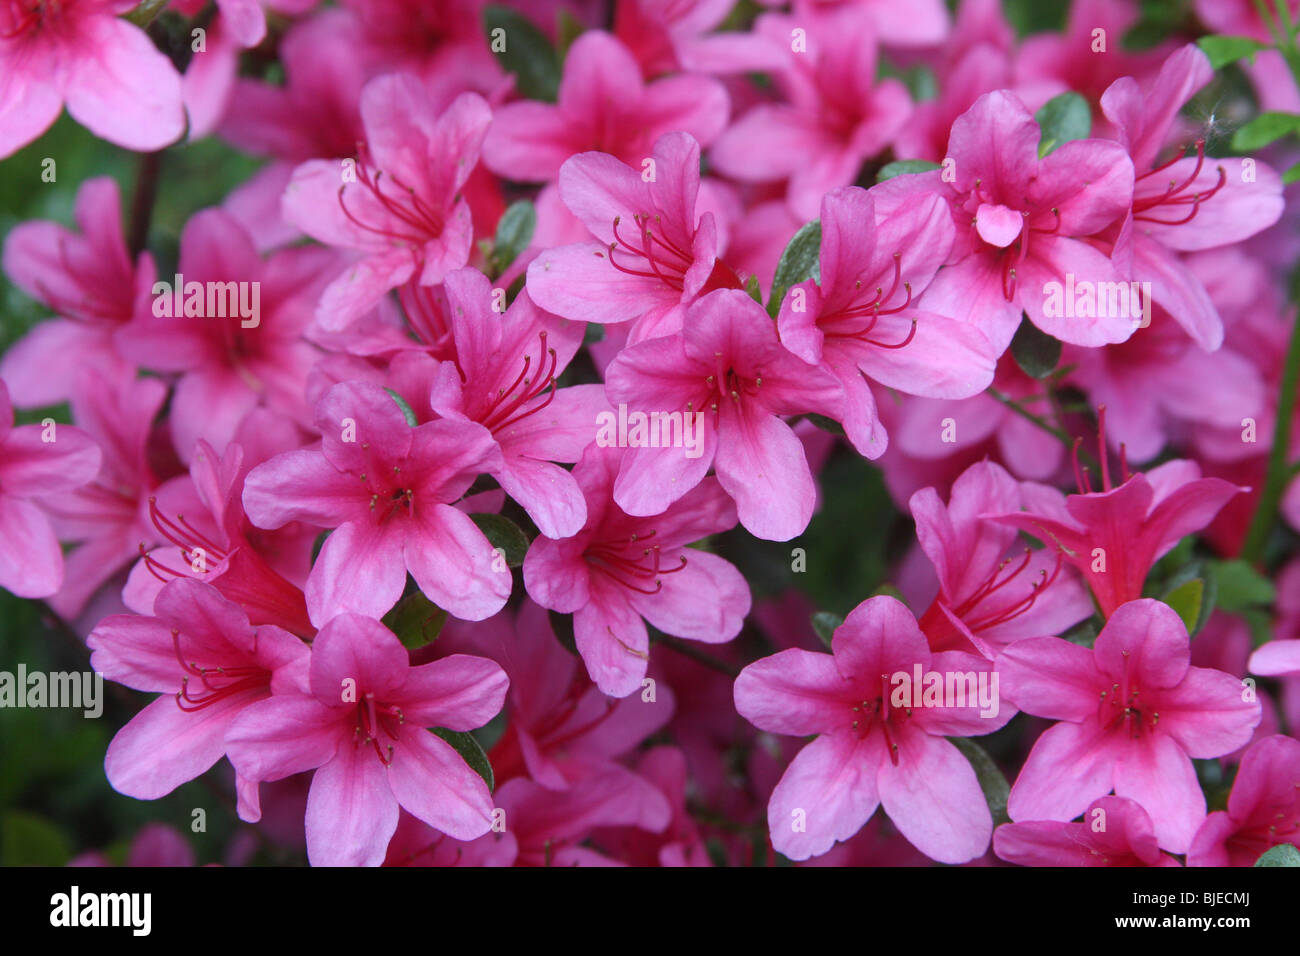 Rhododendron (Rhododendron obtusum), flowers. Stock Photo